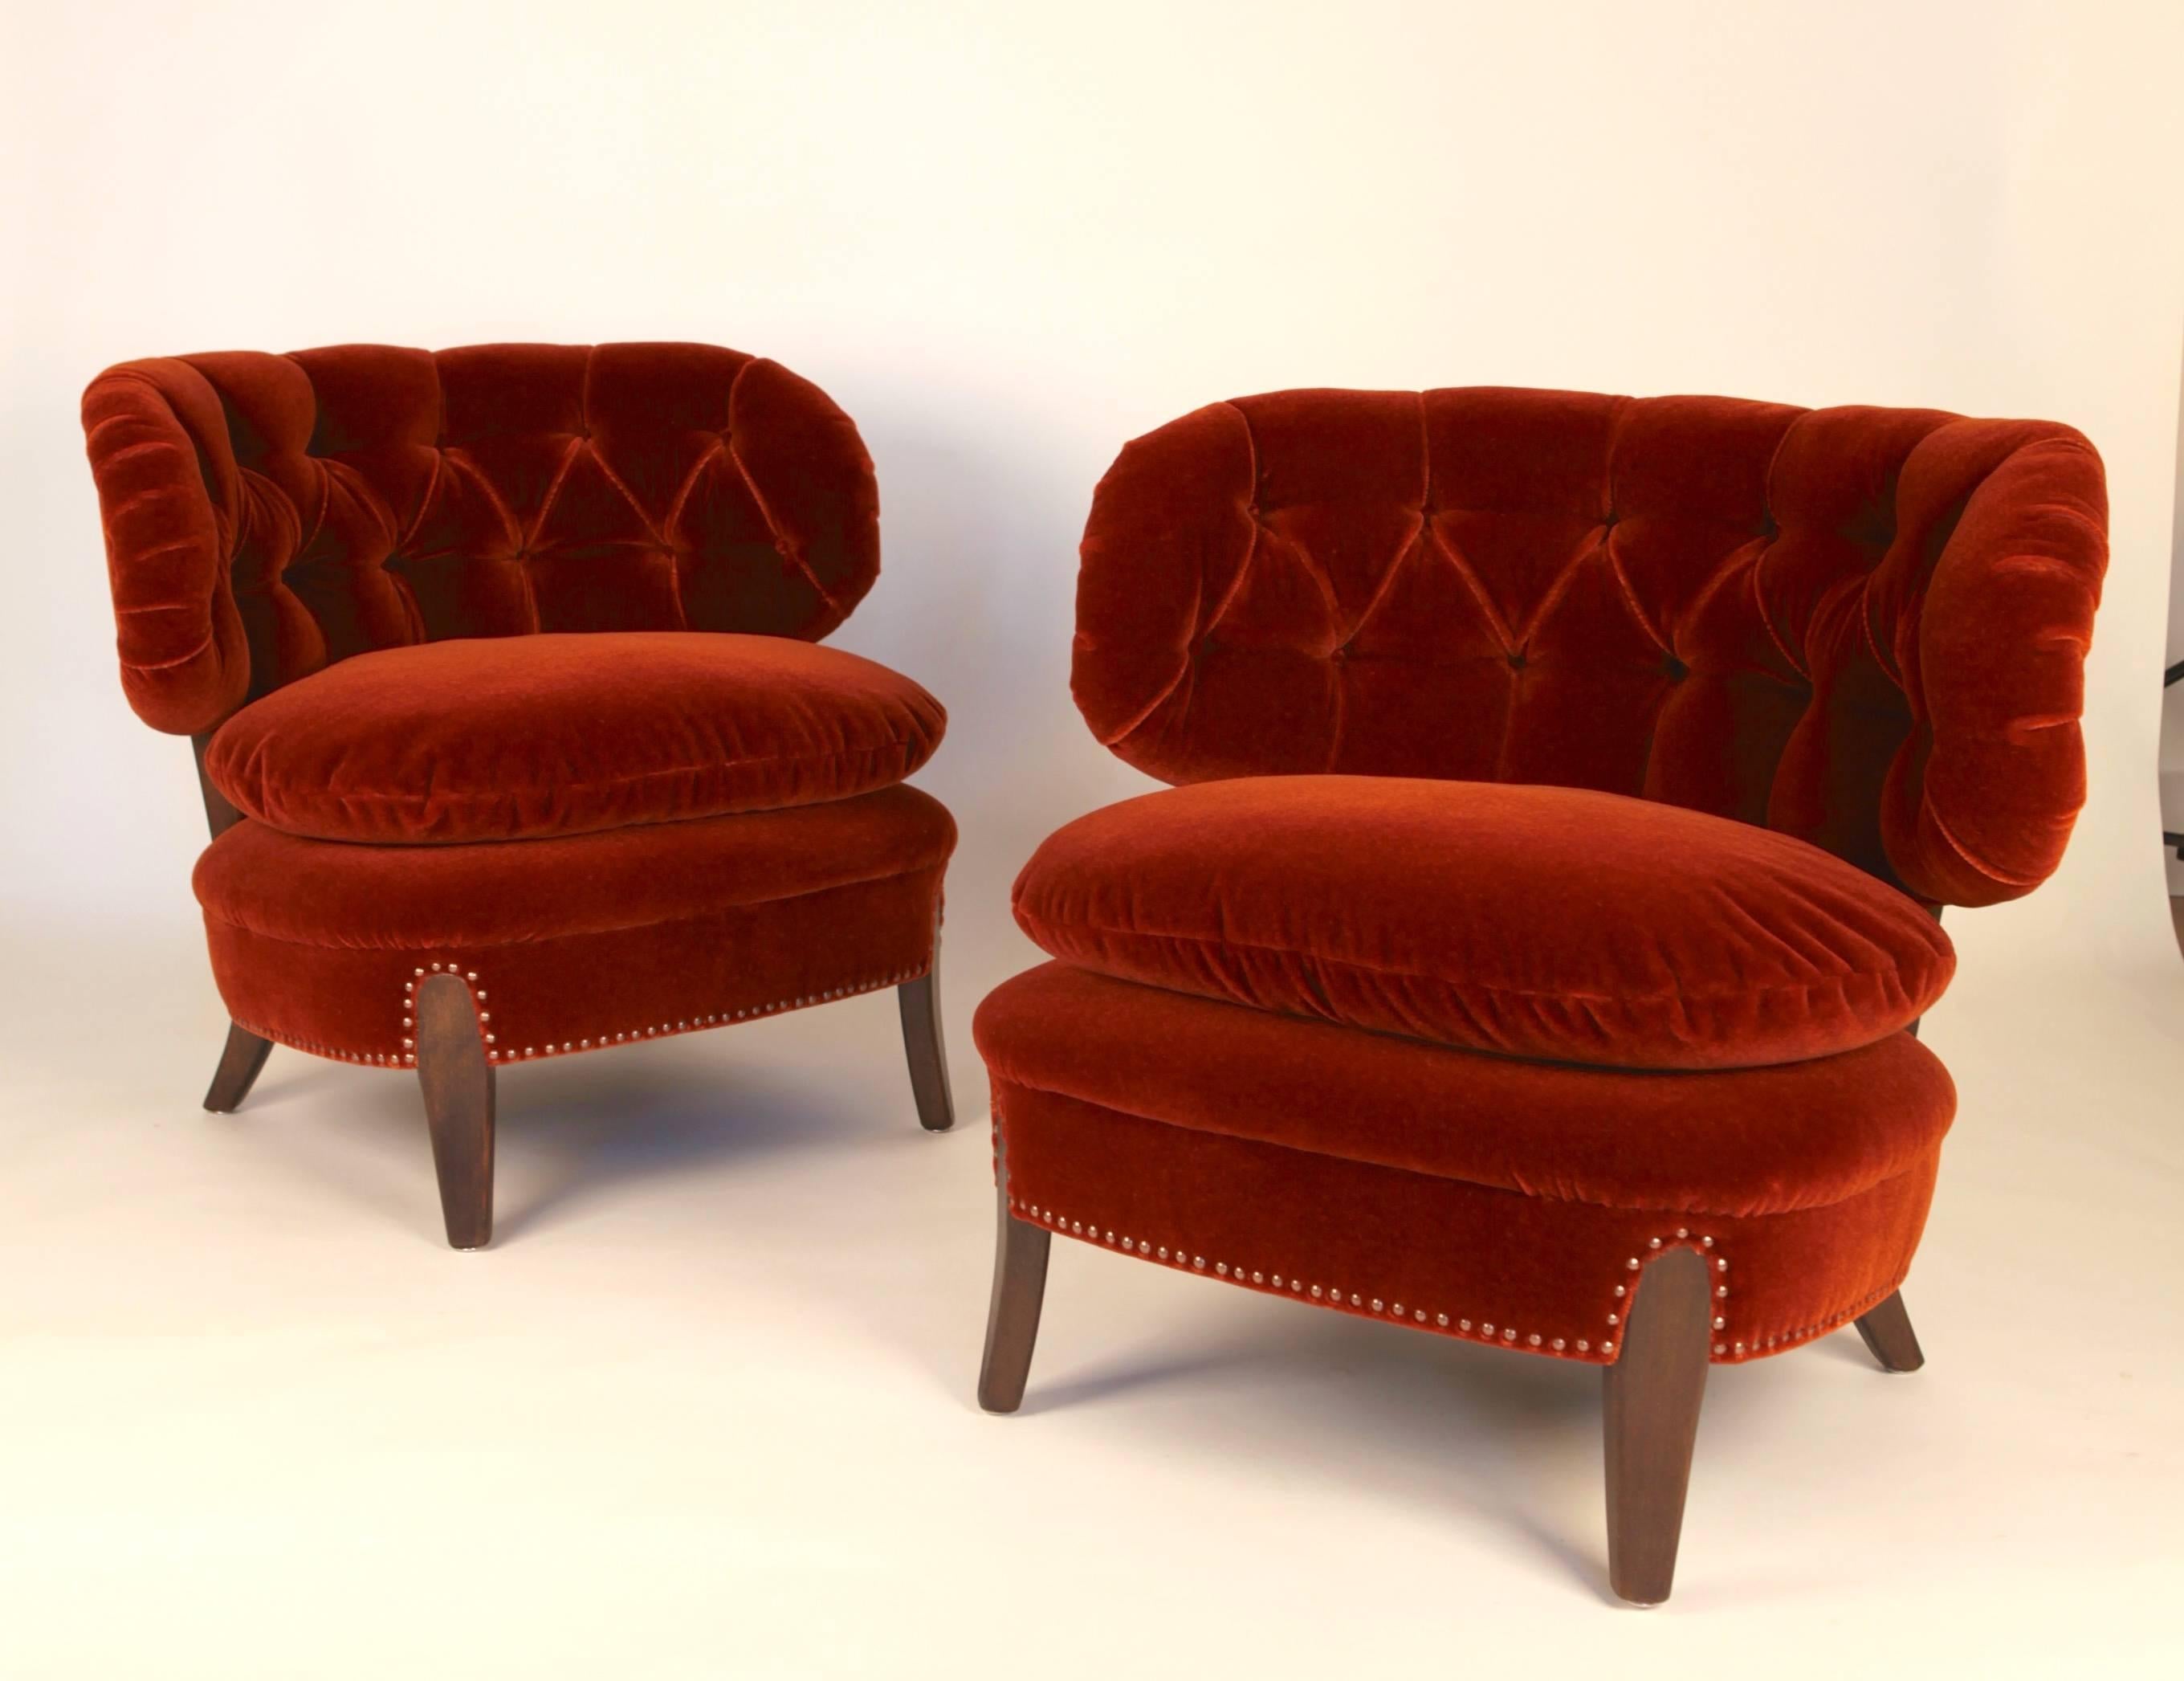 Stained Otto Schulz, Pair of Cocktail Chairs, 1940s